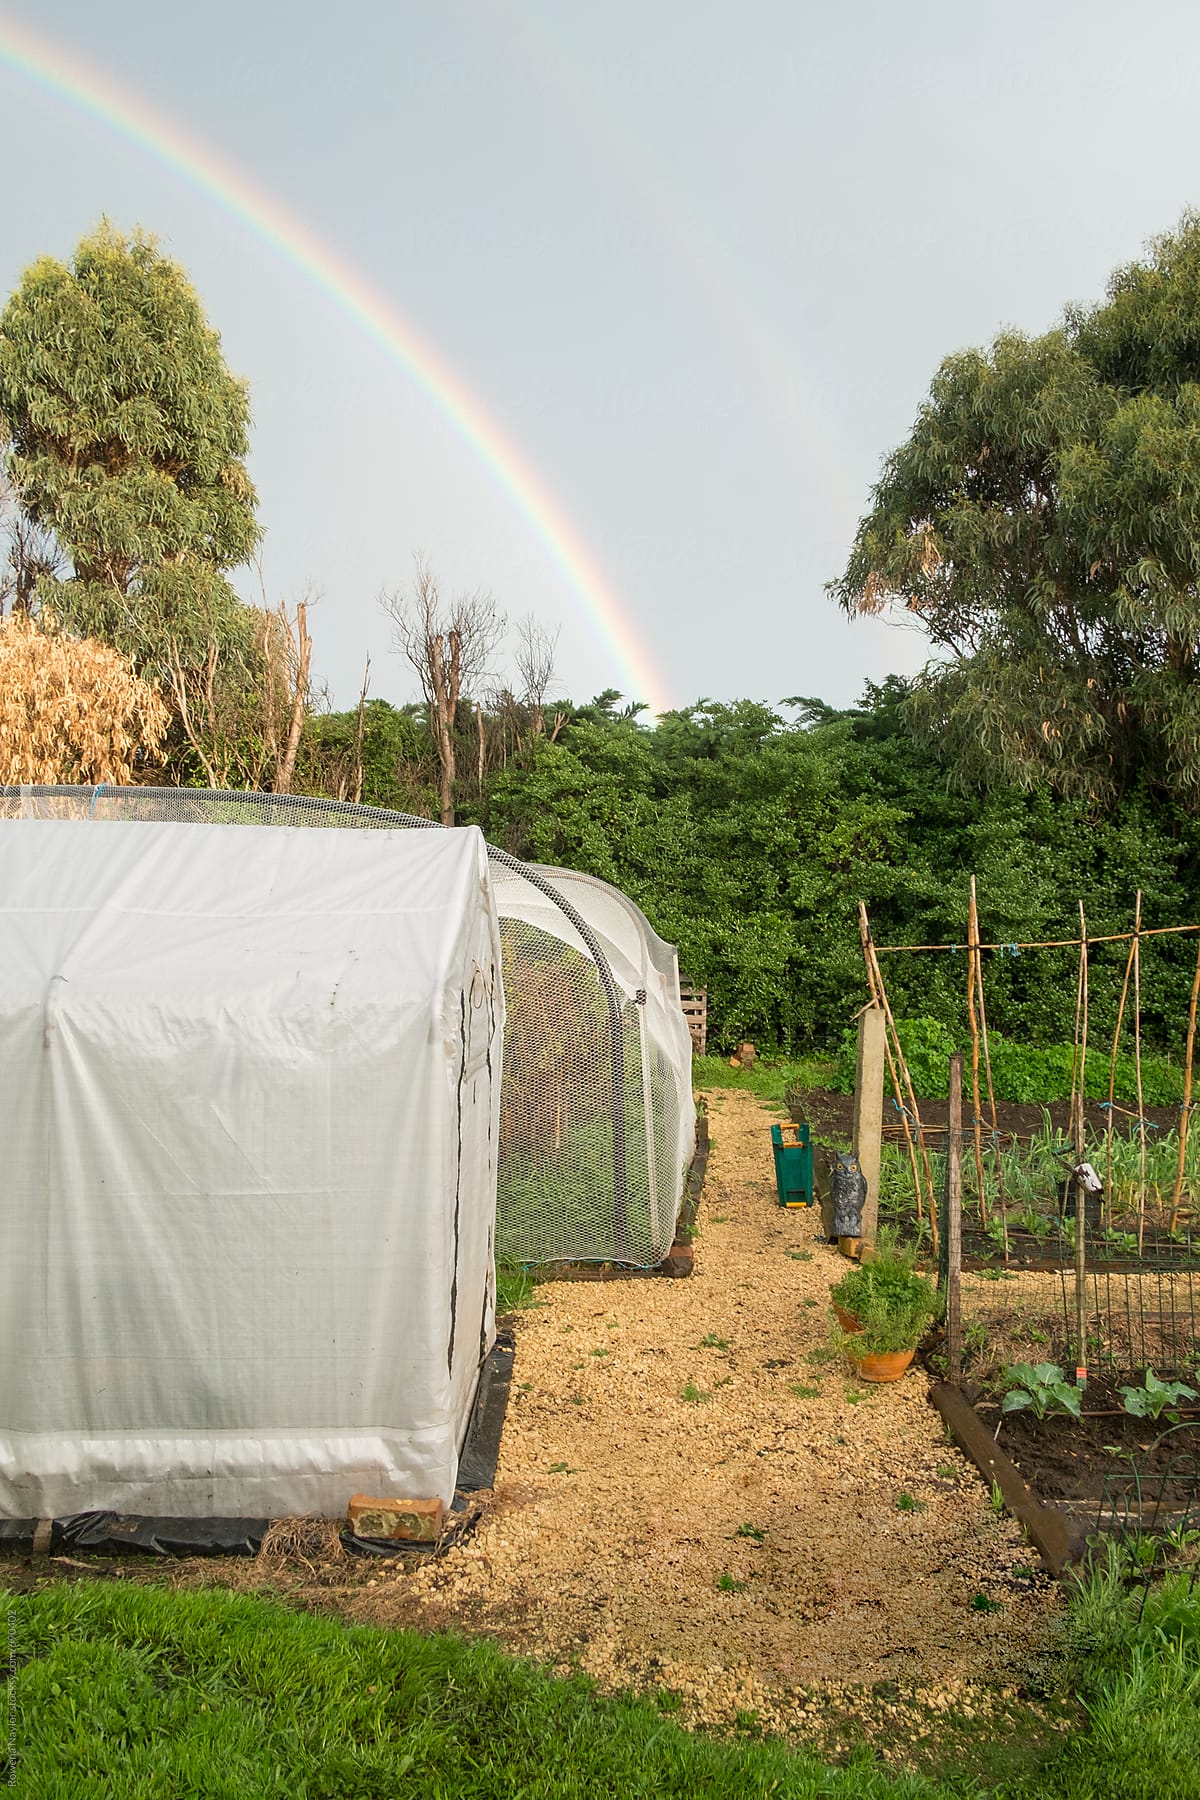 Rustic veggie garden with hothouse and rainbow in background